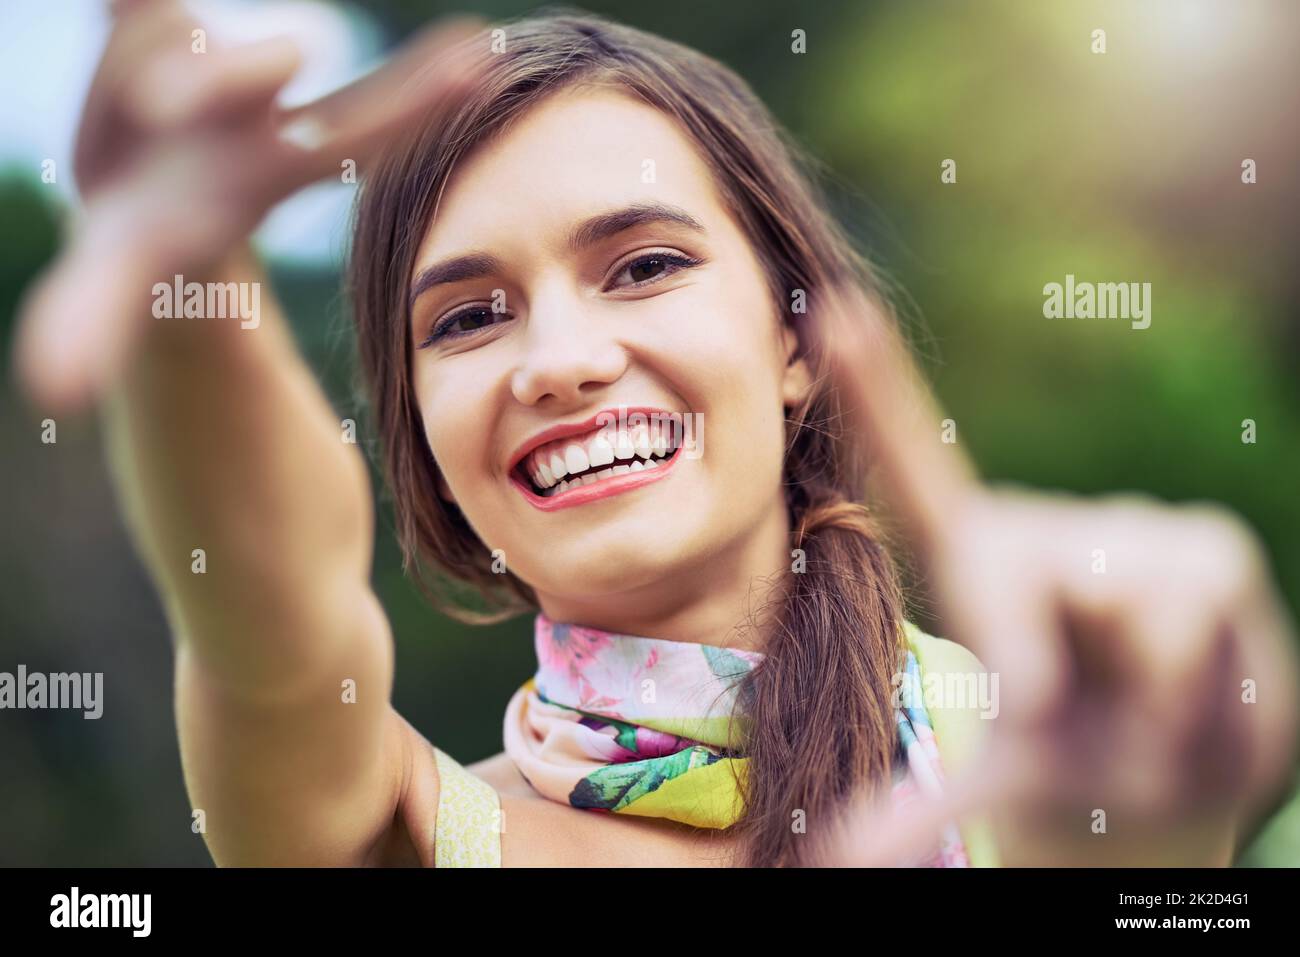 Picture perfect. Portrait of a cheerful young woman making a frame shape with her hands while looking at the camera outside during the day. Stock Photo